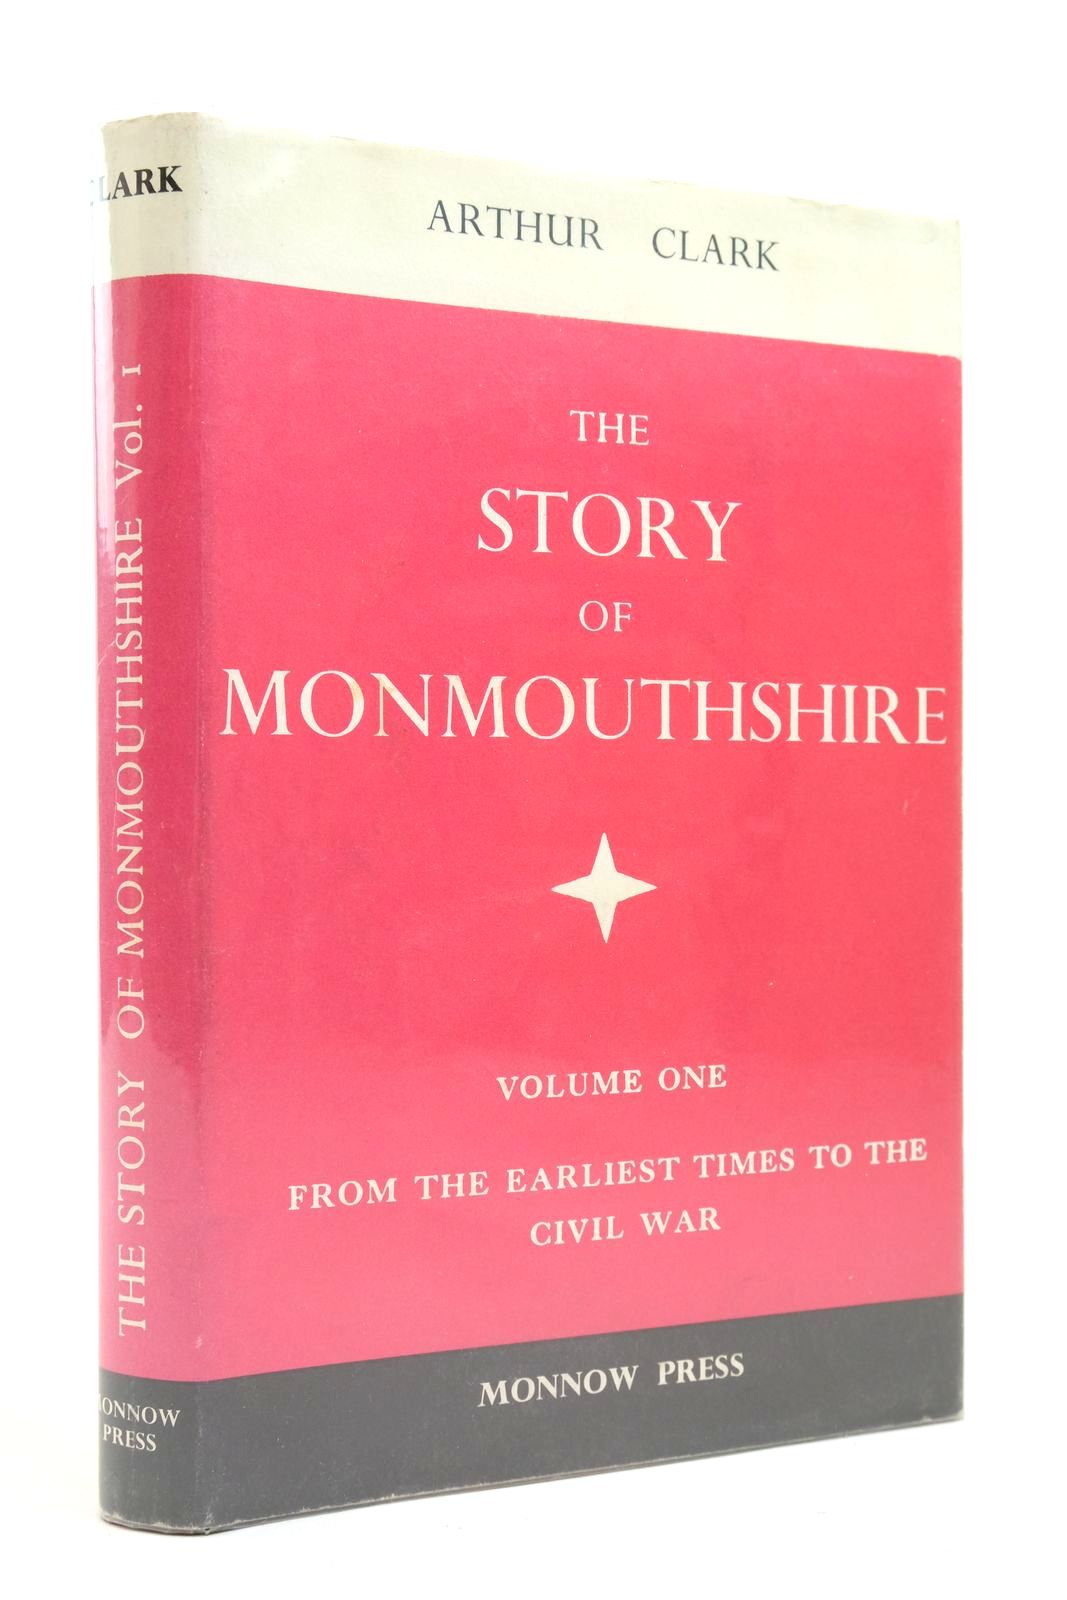 Photo of THE STORY OF MONMOUTHSHIRE VOLUME ONE written by Clark, Arthur published by Monnow Press (STOCK CODE: 2140669)  for sale by Stella & Rose's Books